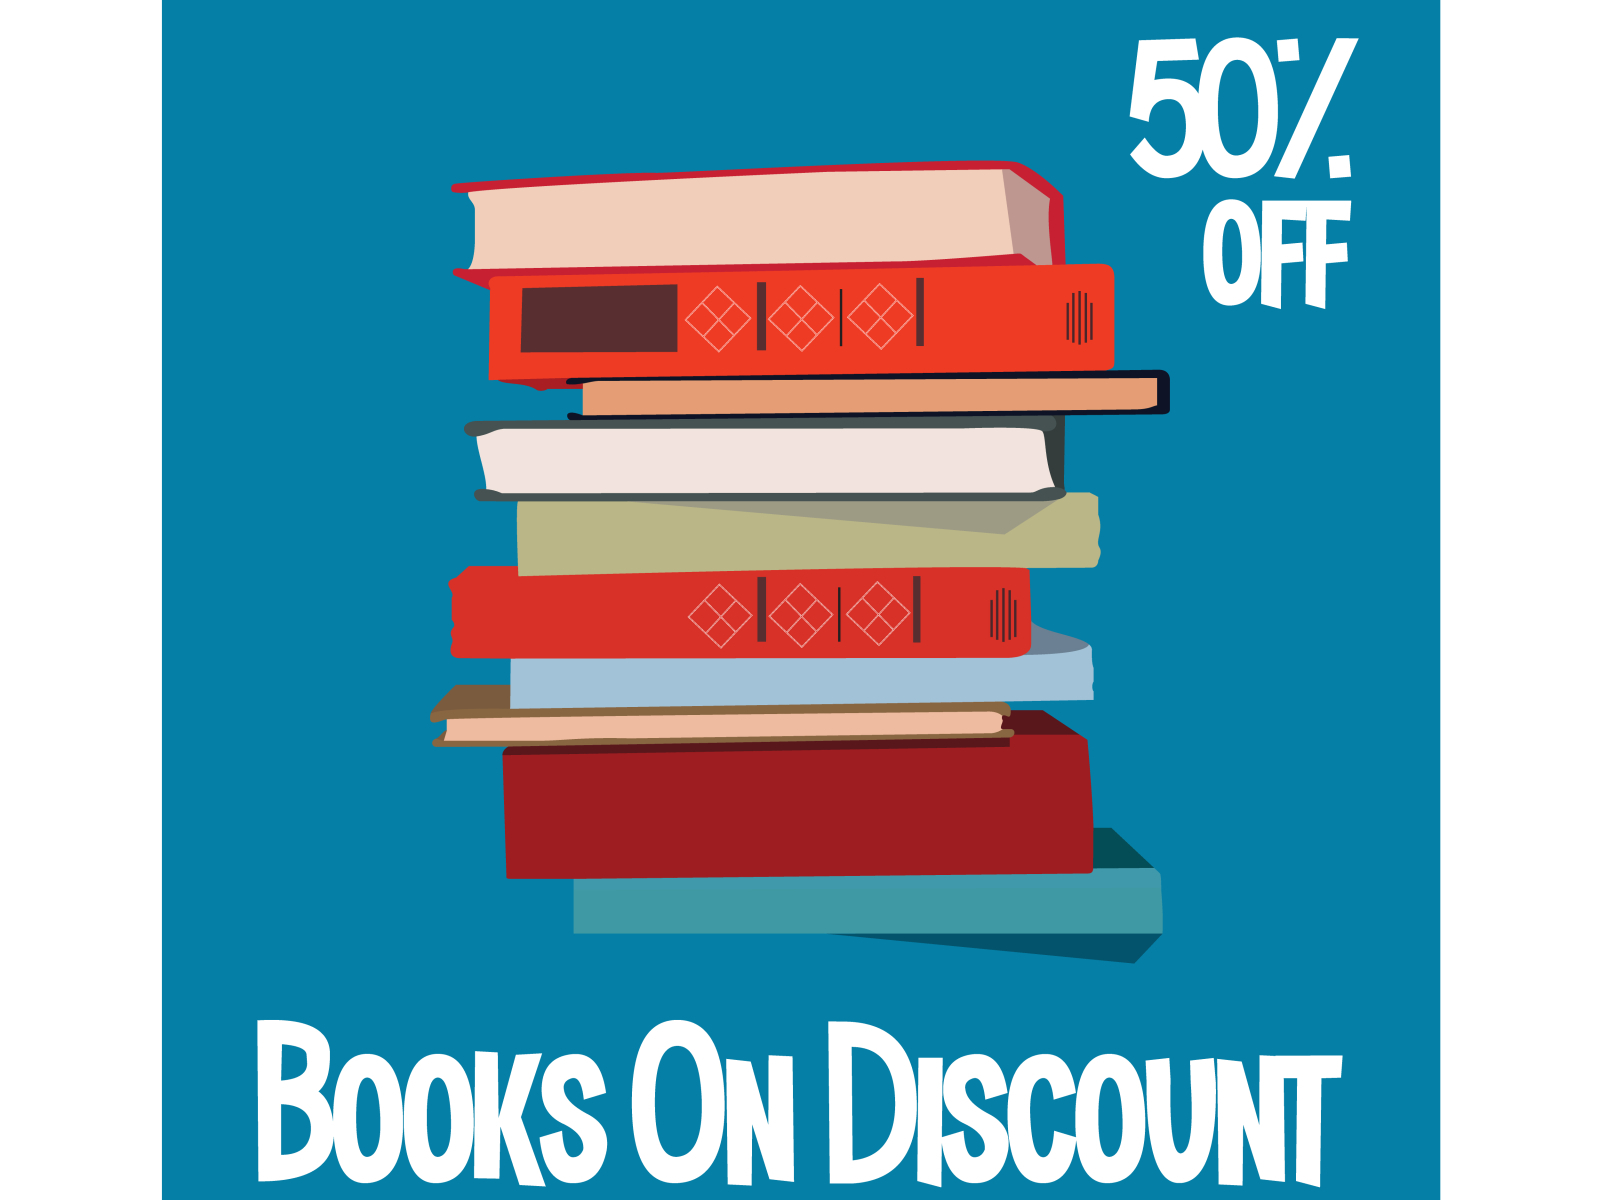 Books sell Vector illustration for poster, banner, advertising. by